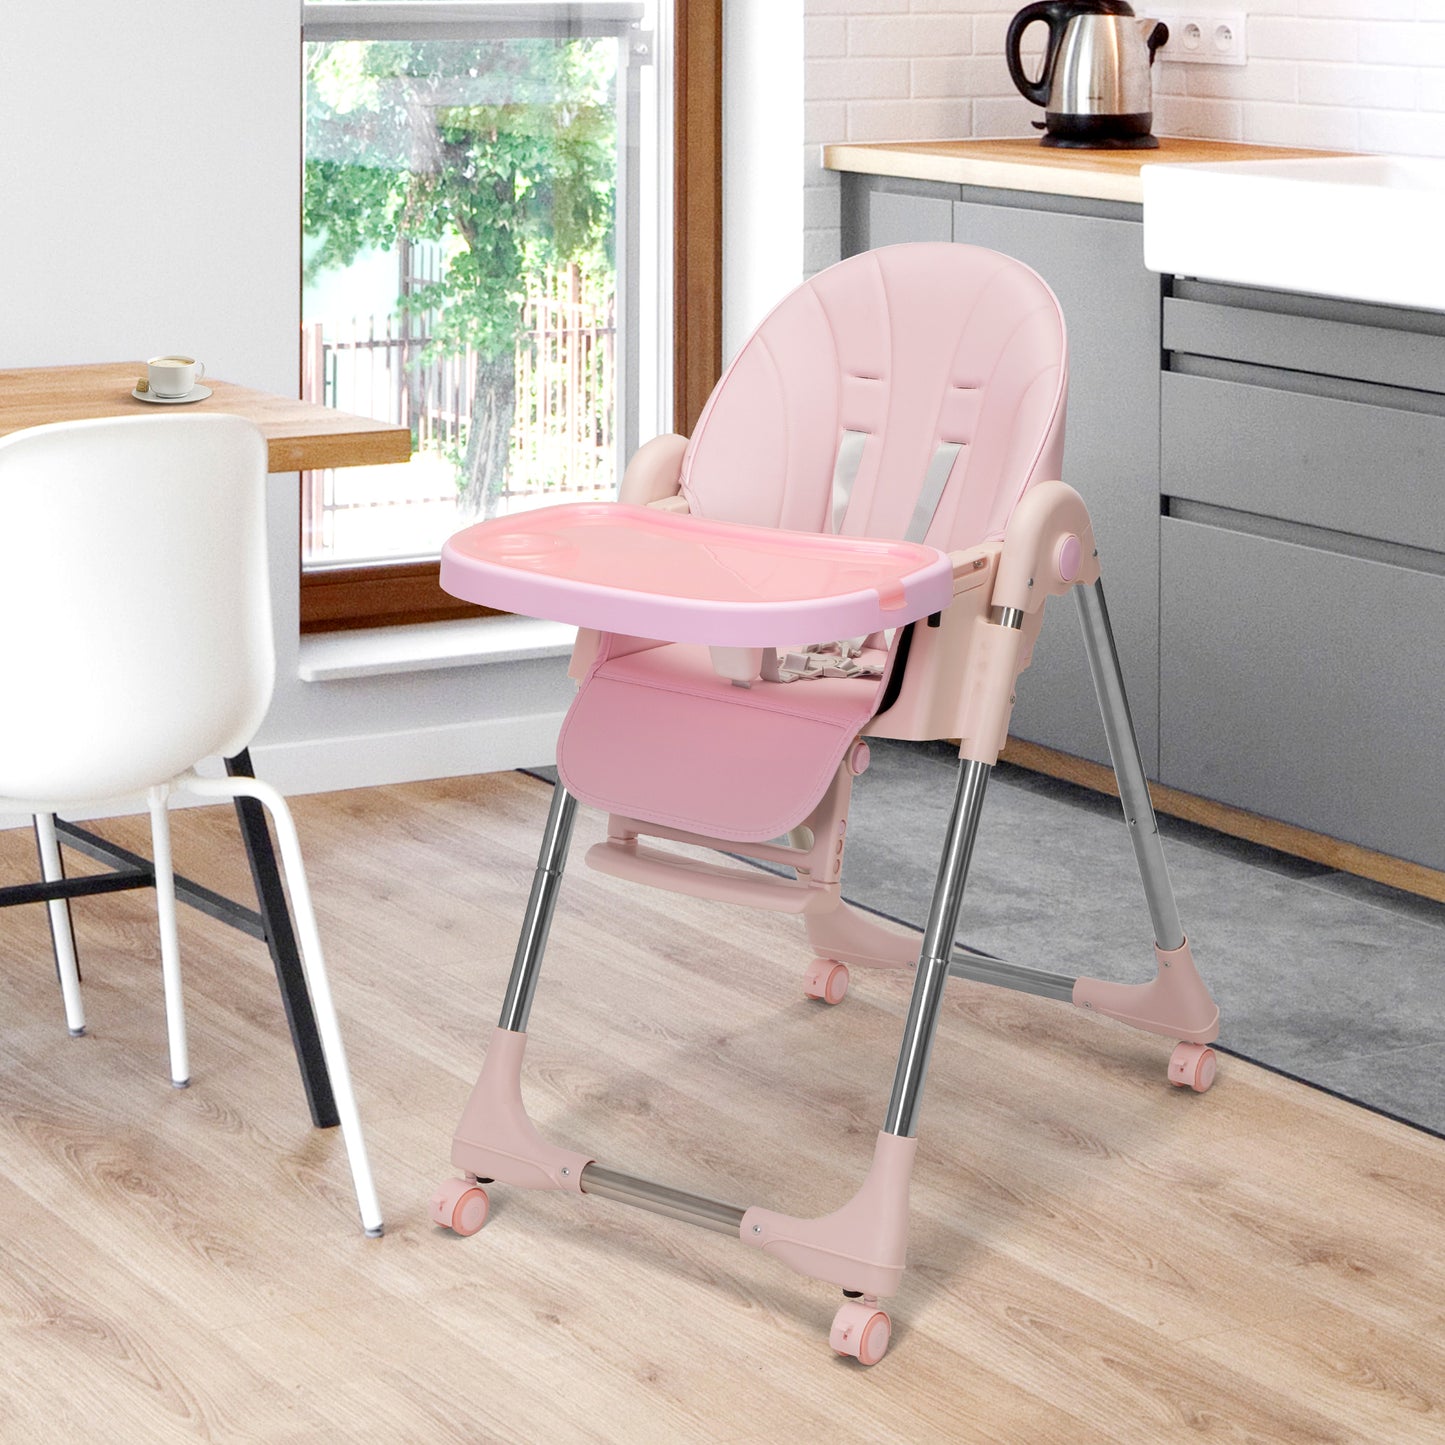 Convertible High Chair on Wheels with Removable Tray;  Height and Angle Adjustment for Baby And Toddler